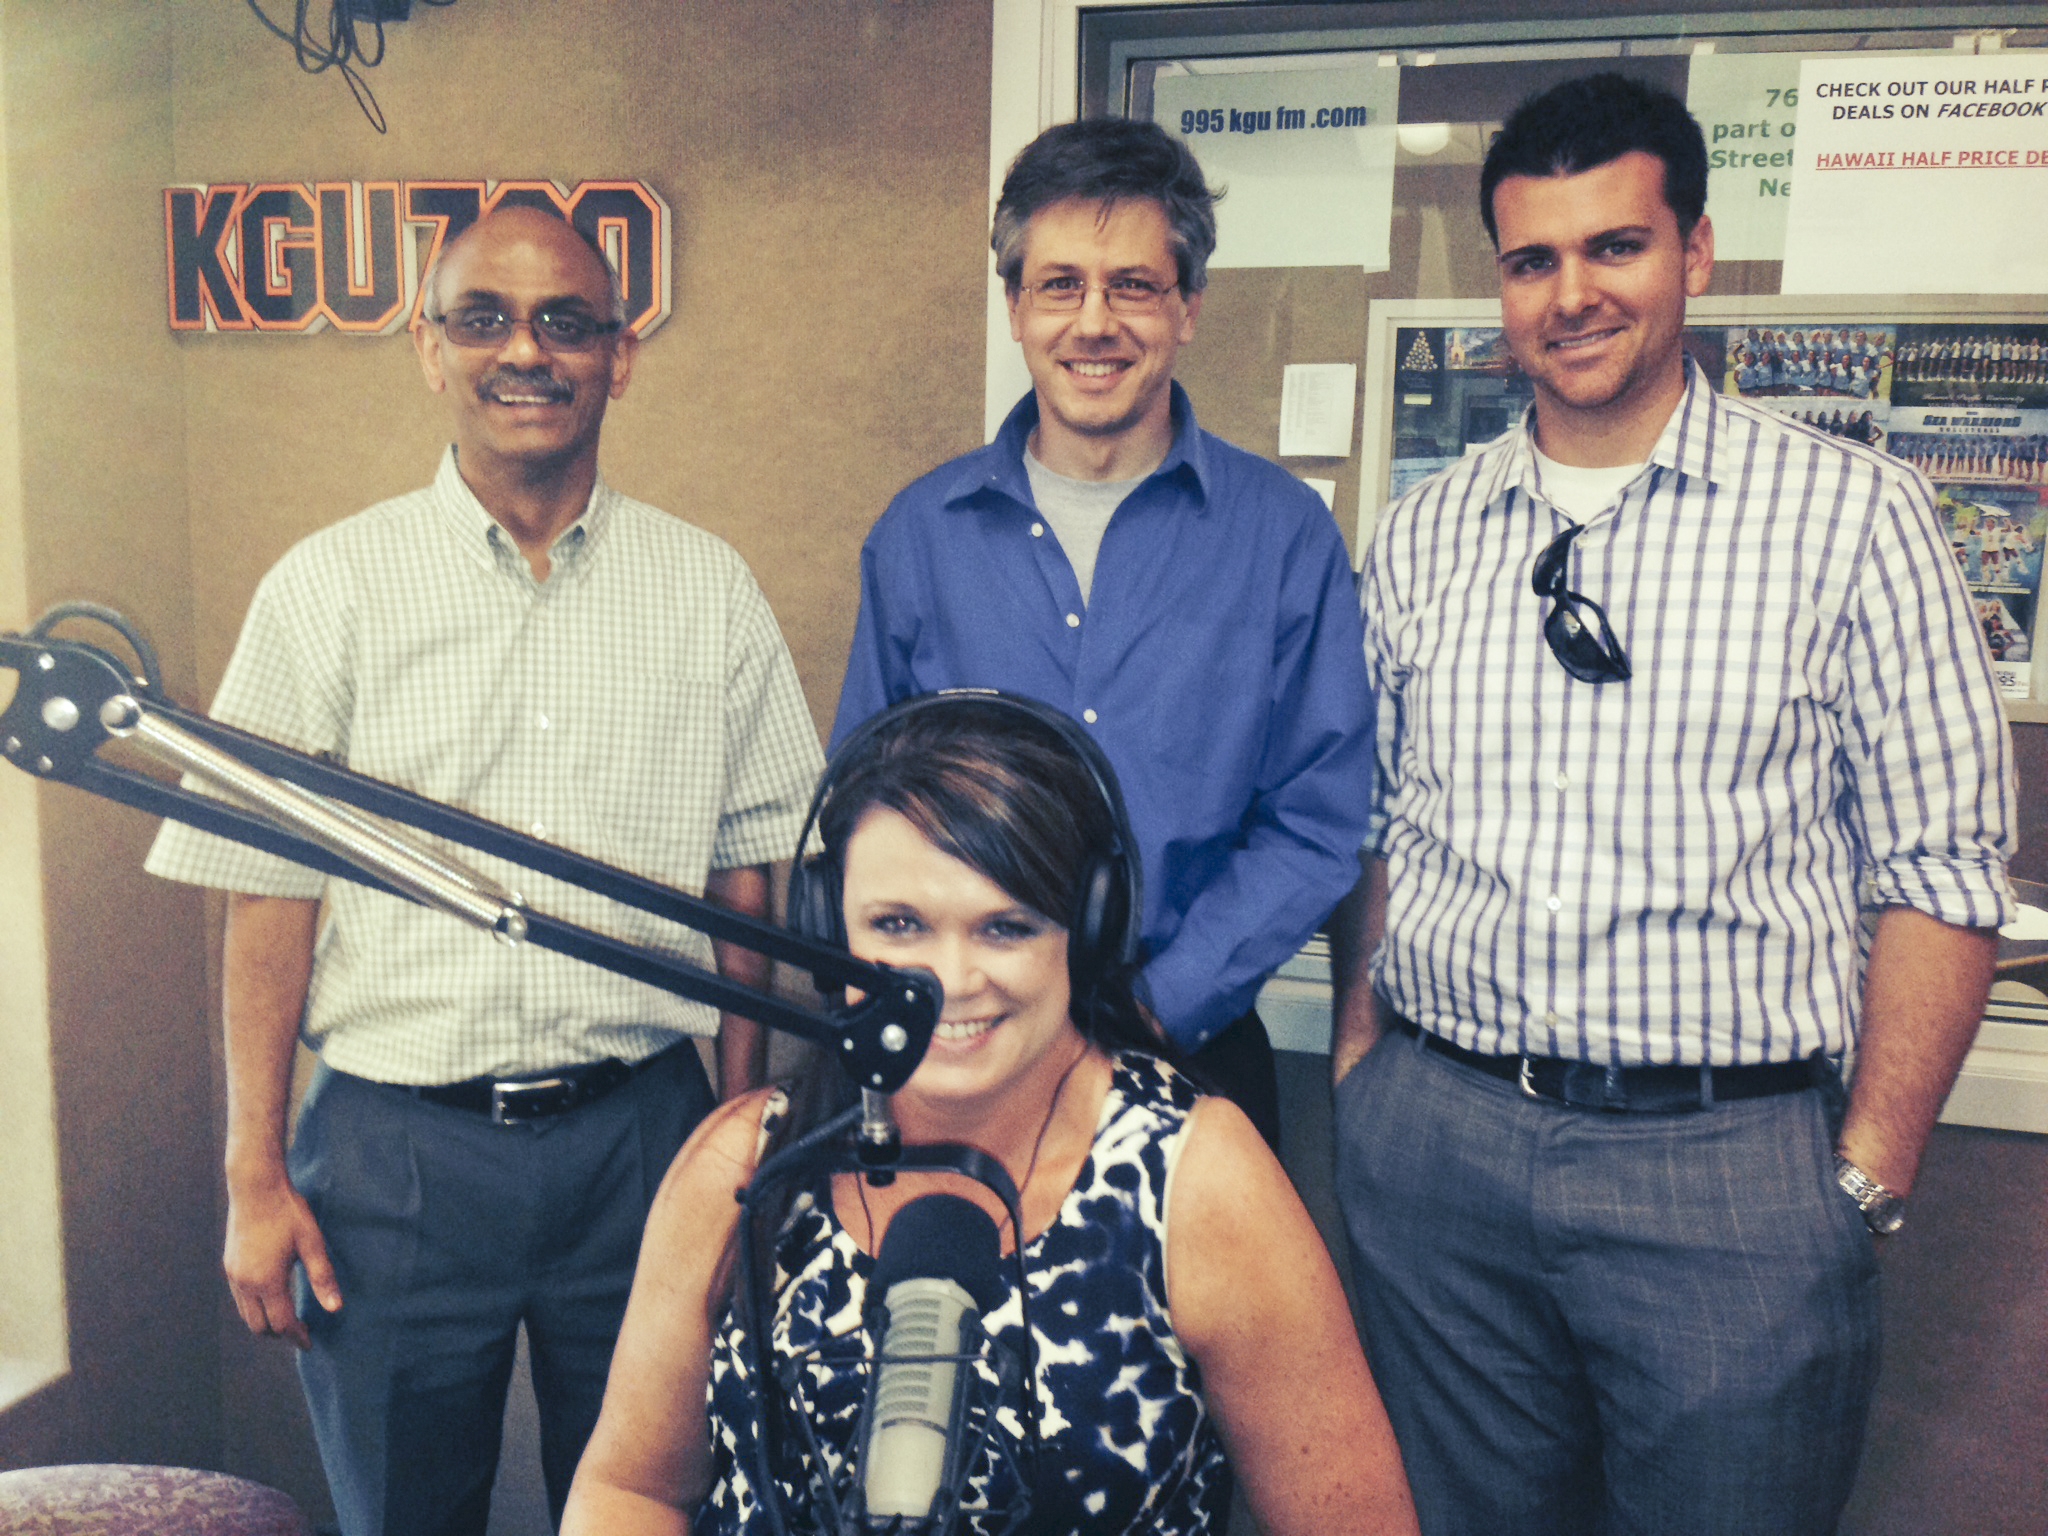 Our team spent time on the air with KGU-AM 760 discussing Hawaii’s solar concerns. 